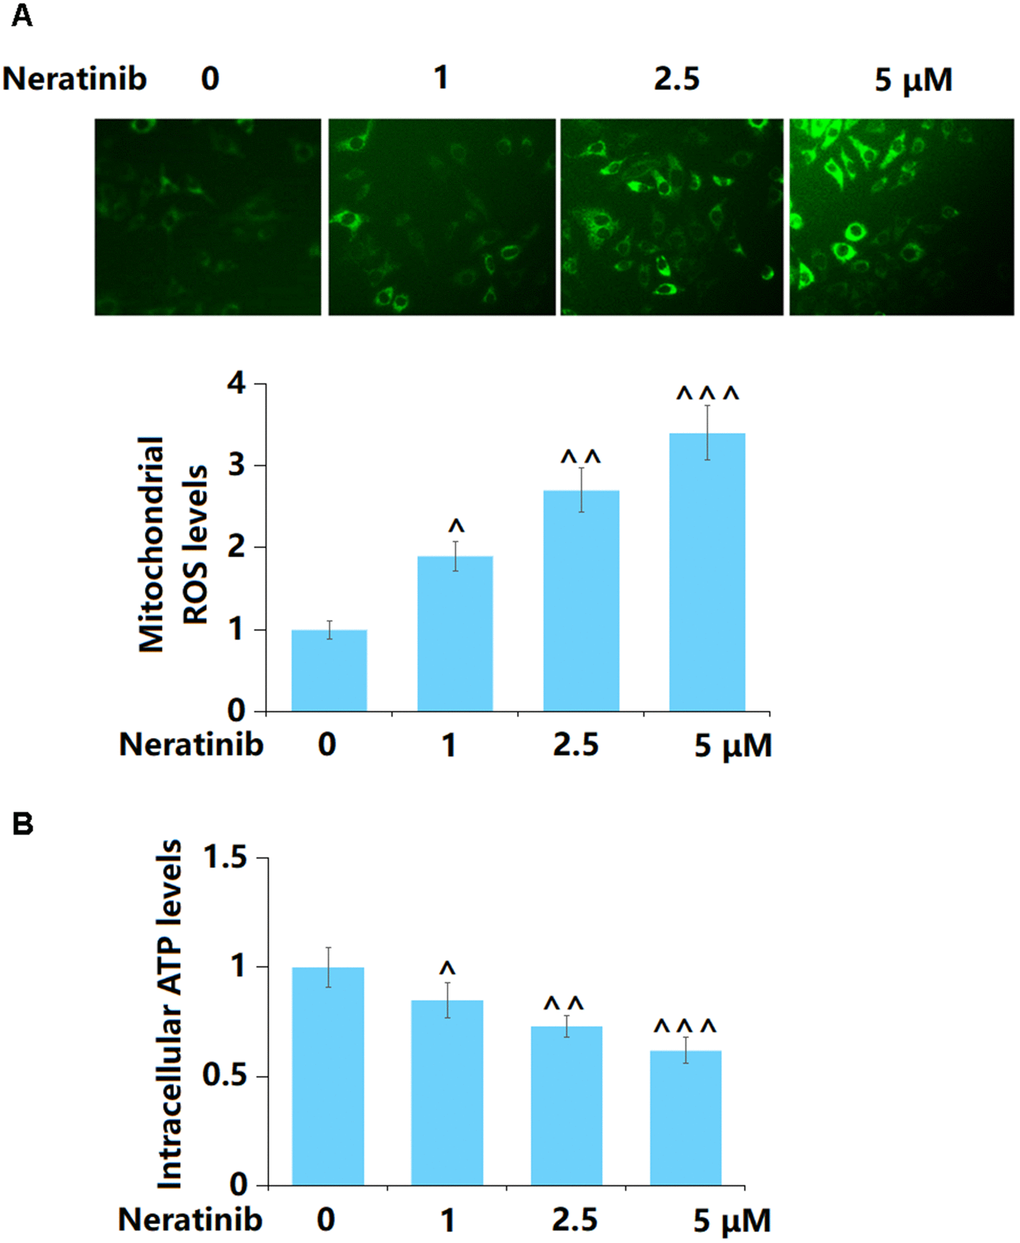 Neratinib induced the production of mitochondrial ROS and mitochondrial dysfunction. AU565 cells were stimulated with Neratinib (1, 2.5, 5 μM) for 36 hours. (A) The levels of mitochondrial ROS were measured using Mitosox Green; (B) The levels of intracellular ATP (^, ^^, ^^^, P